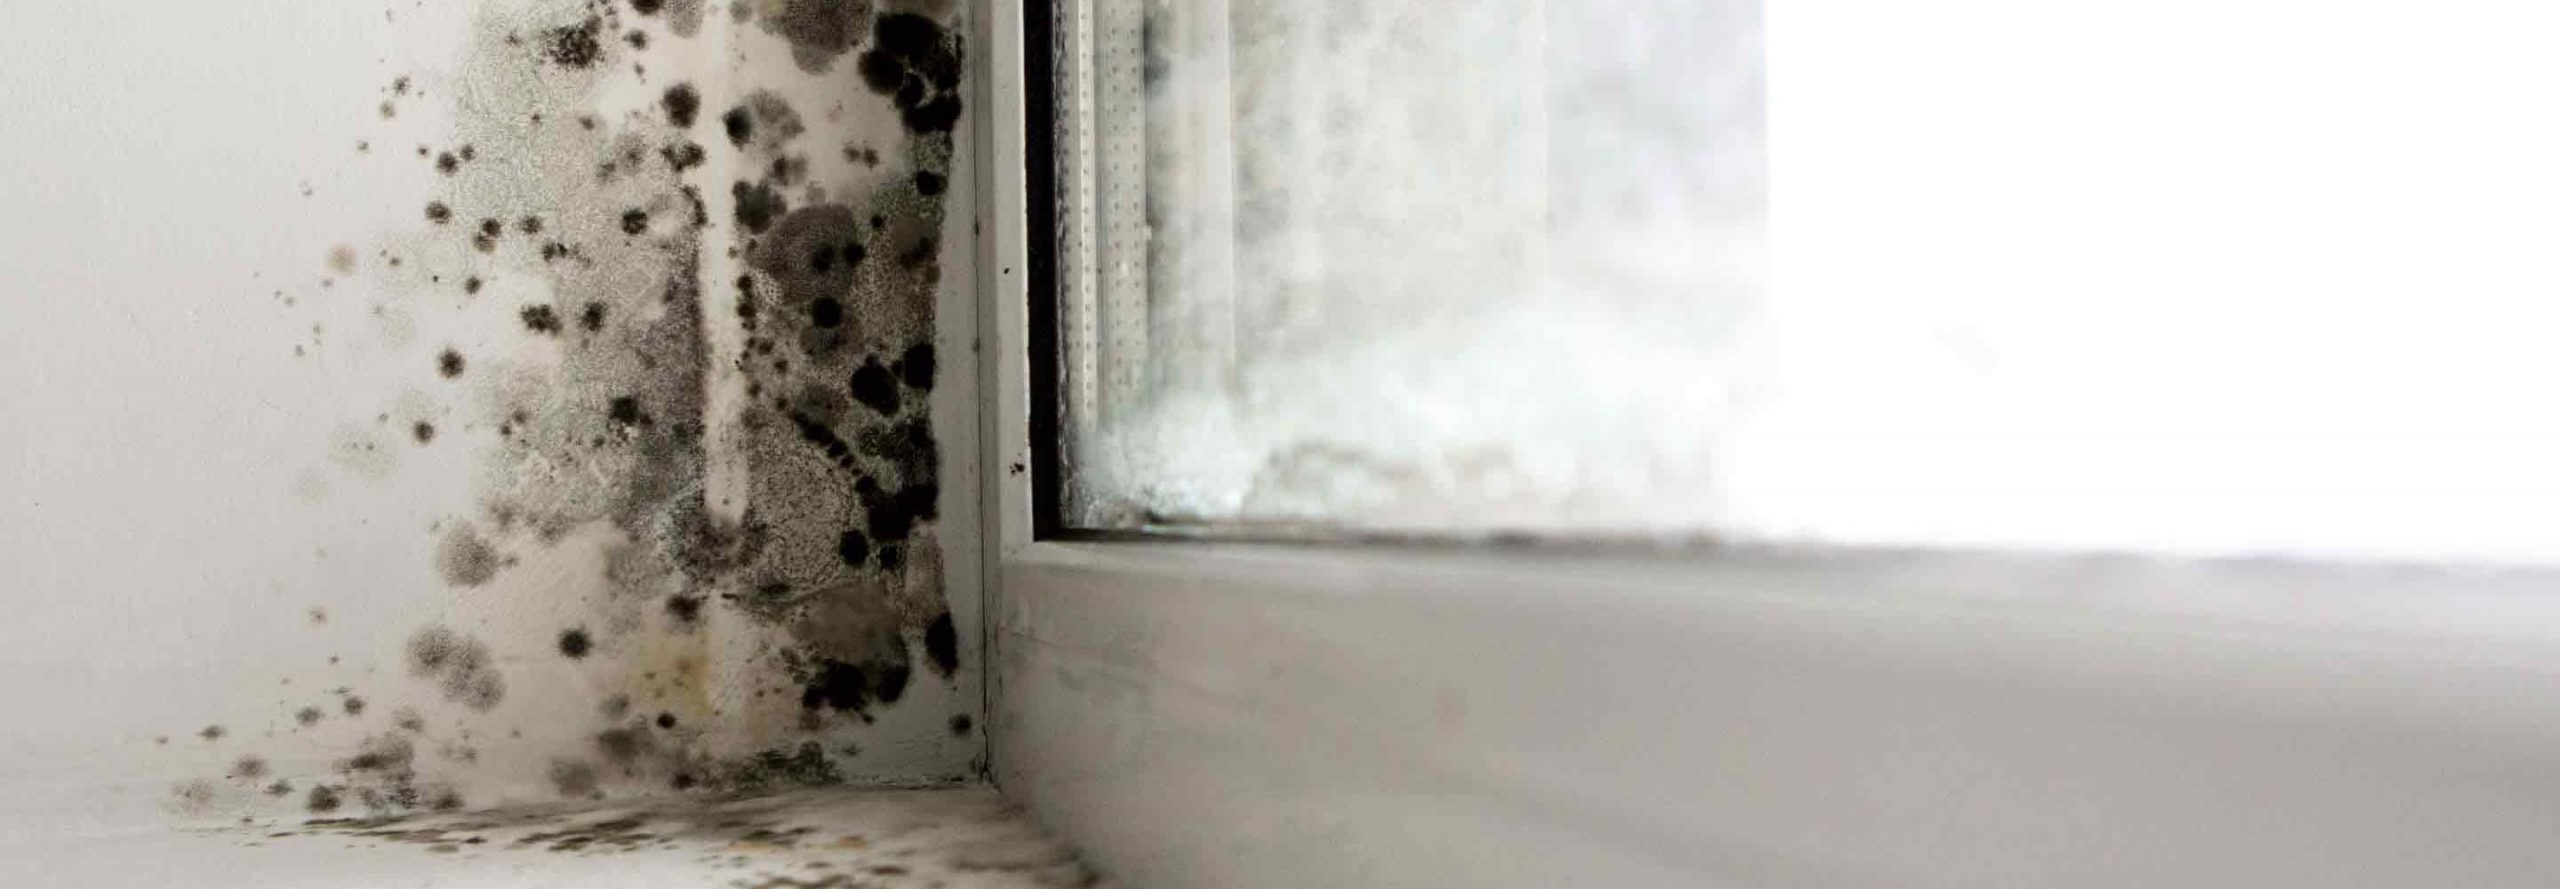 What You Need To Know About Mold